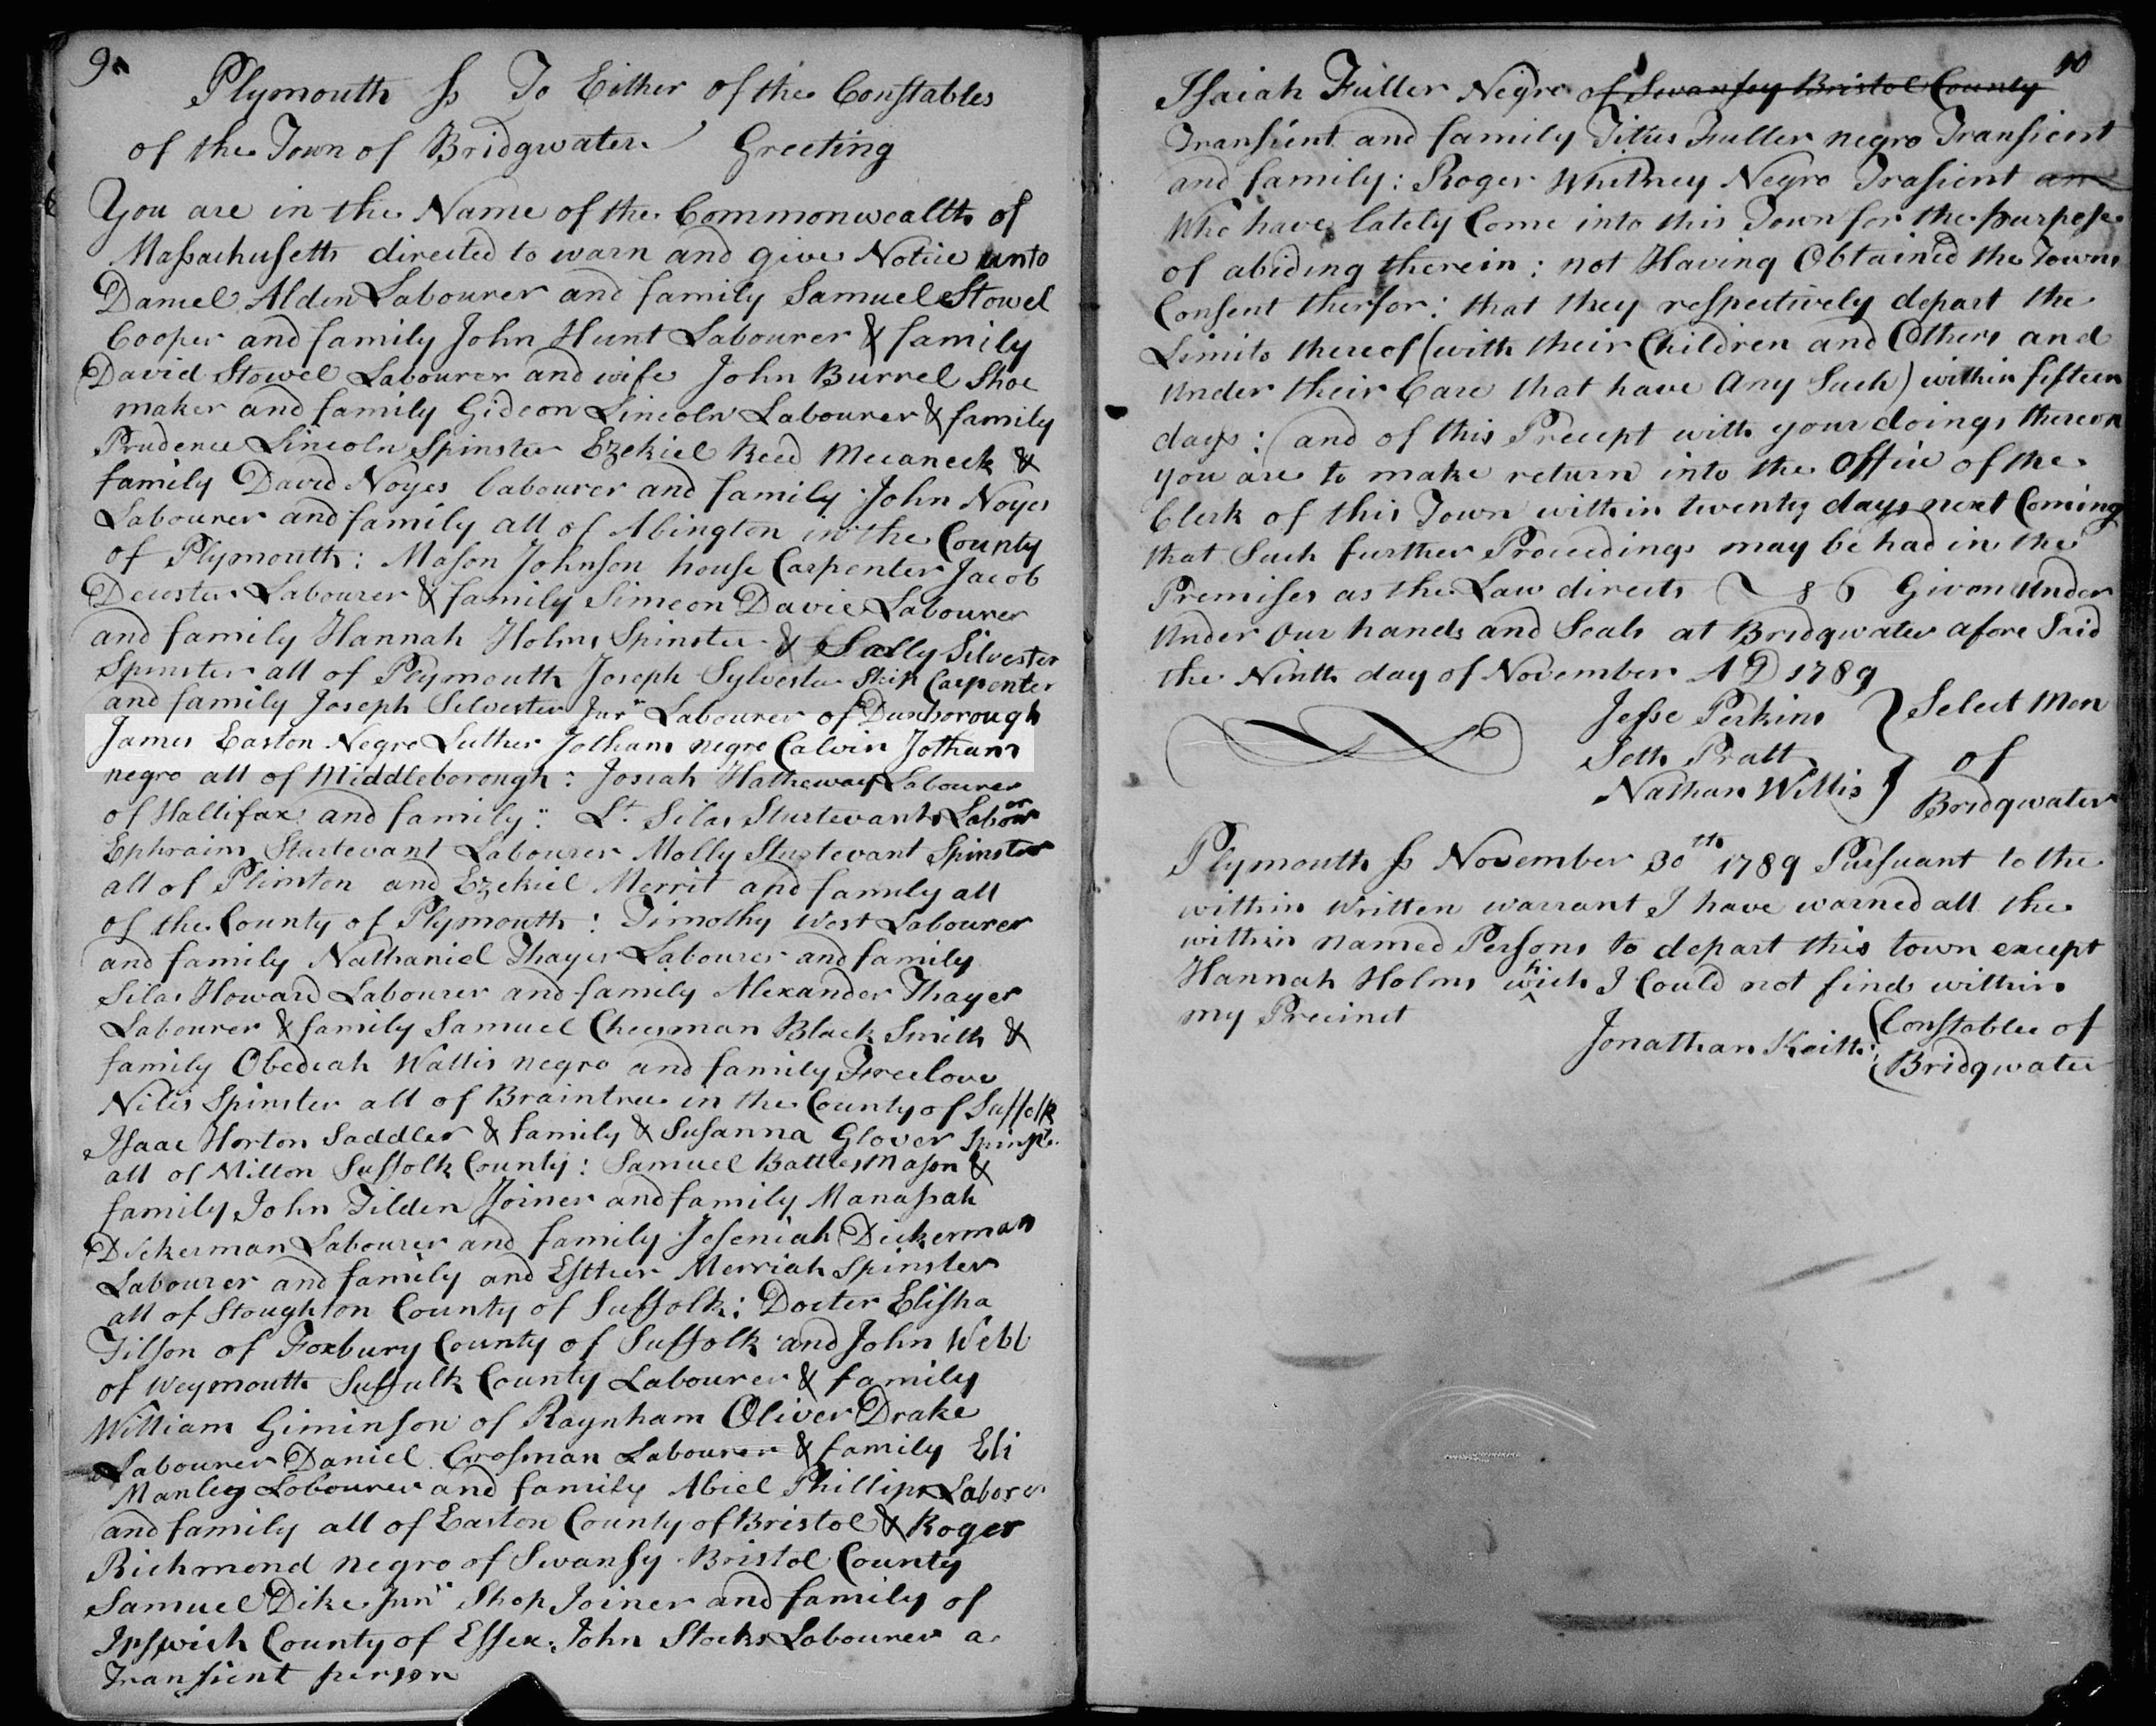 Scan of handwritten document, with one line highlighted.